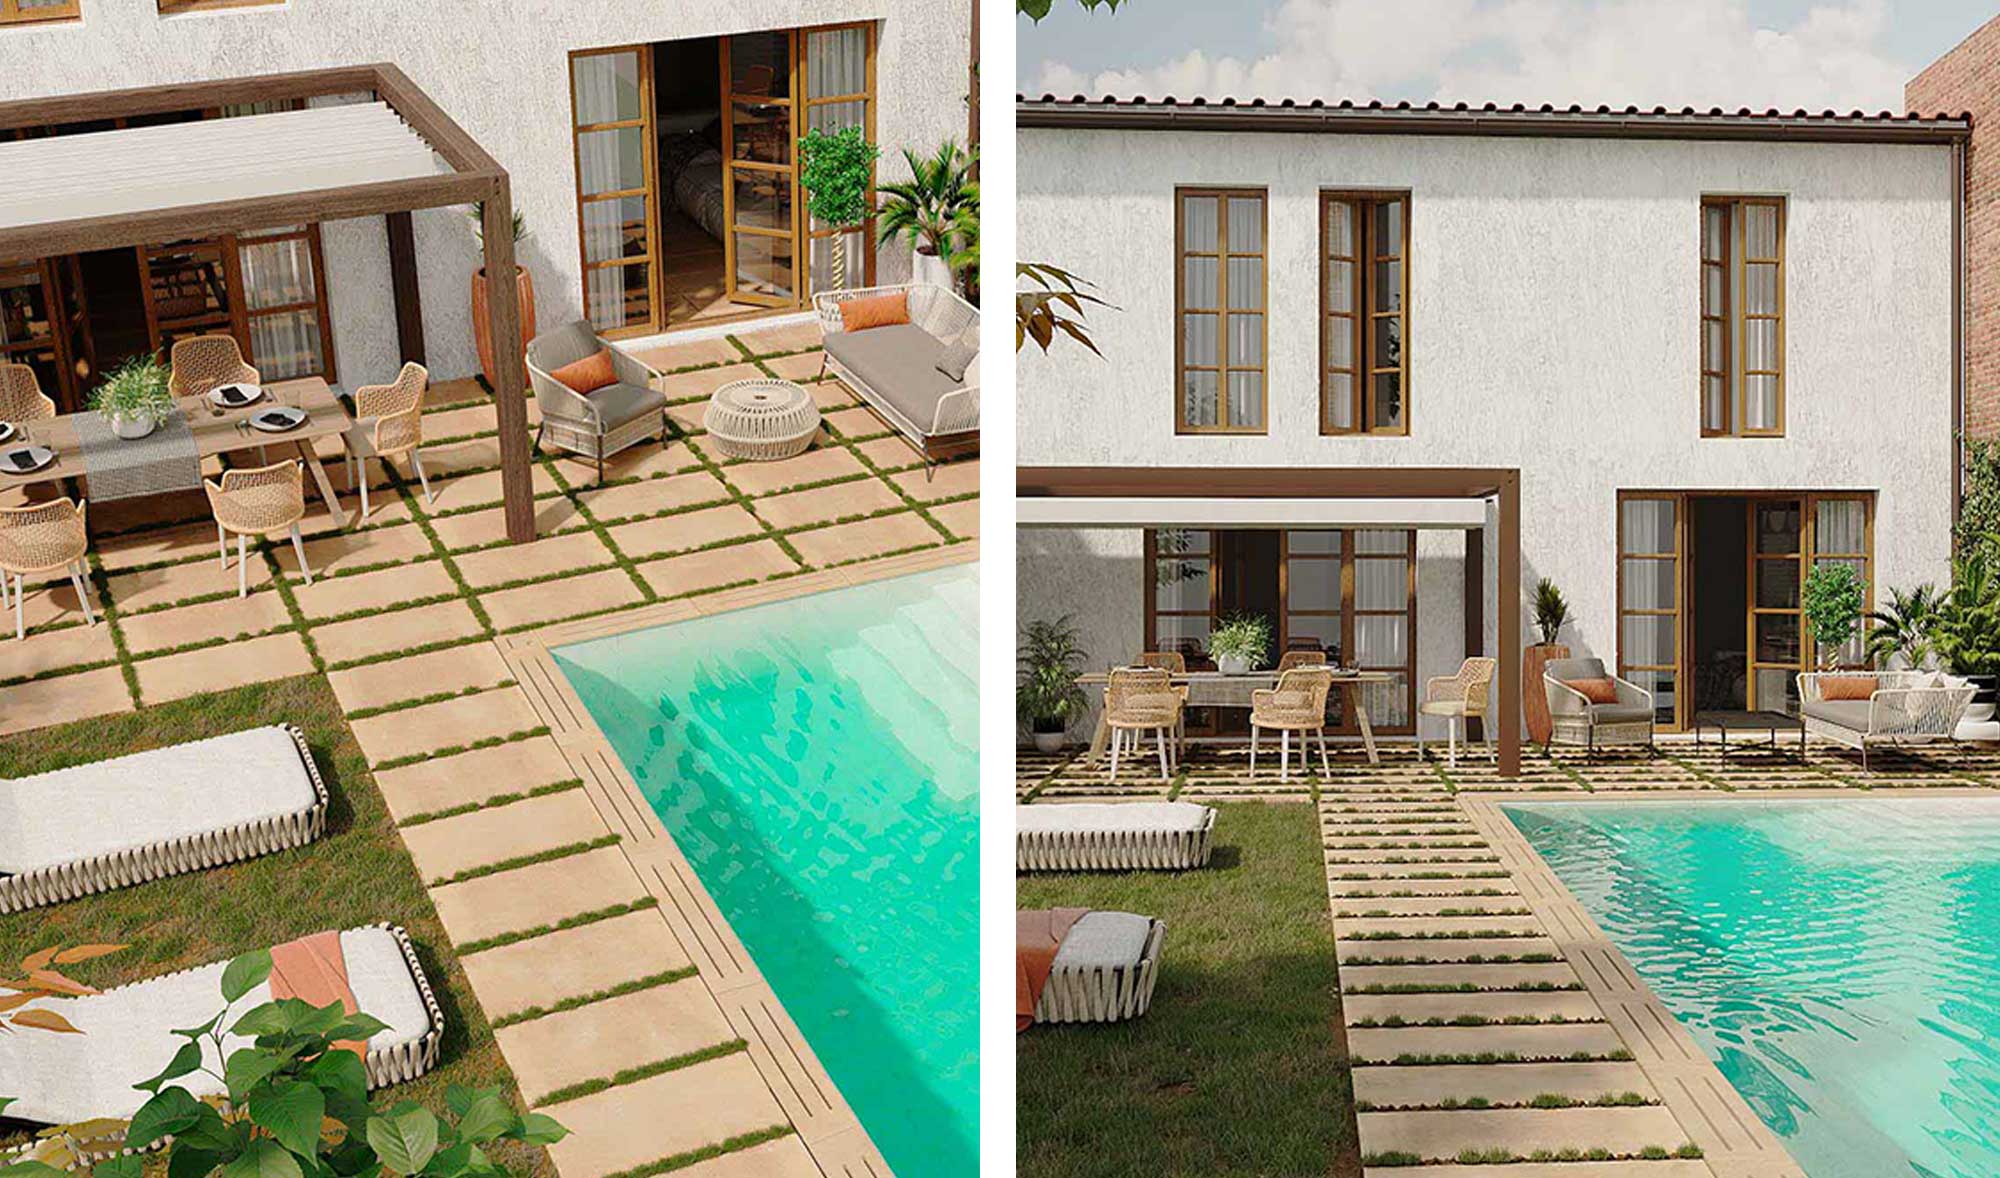 swimming pool and terrace of each with rustic porcelain tiles